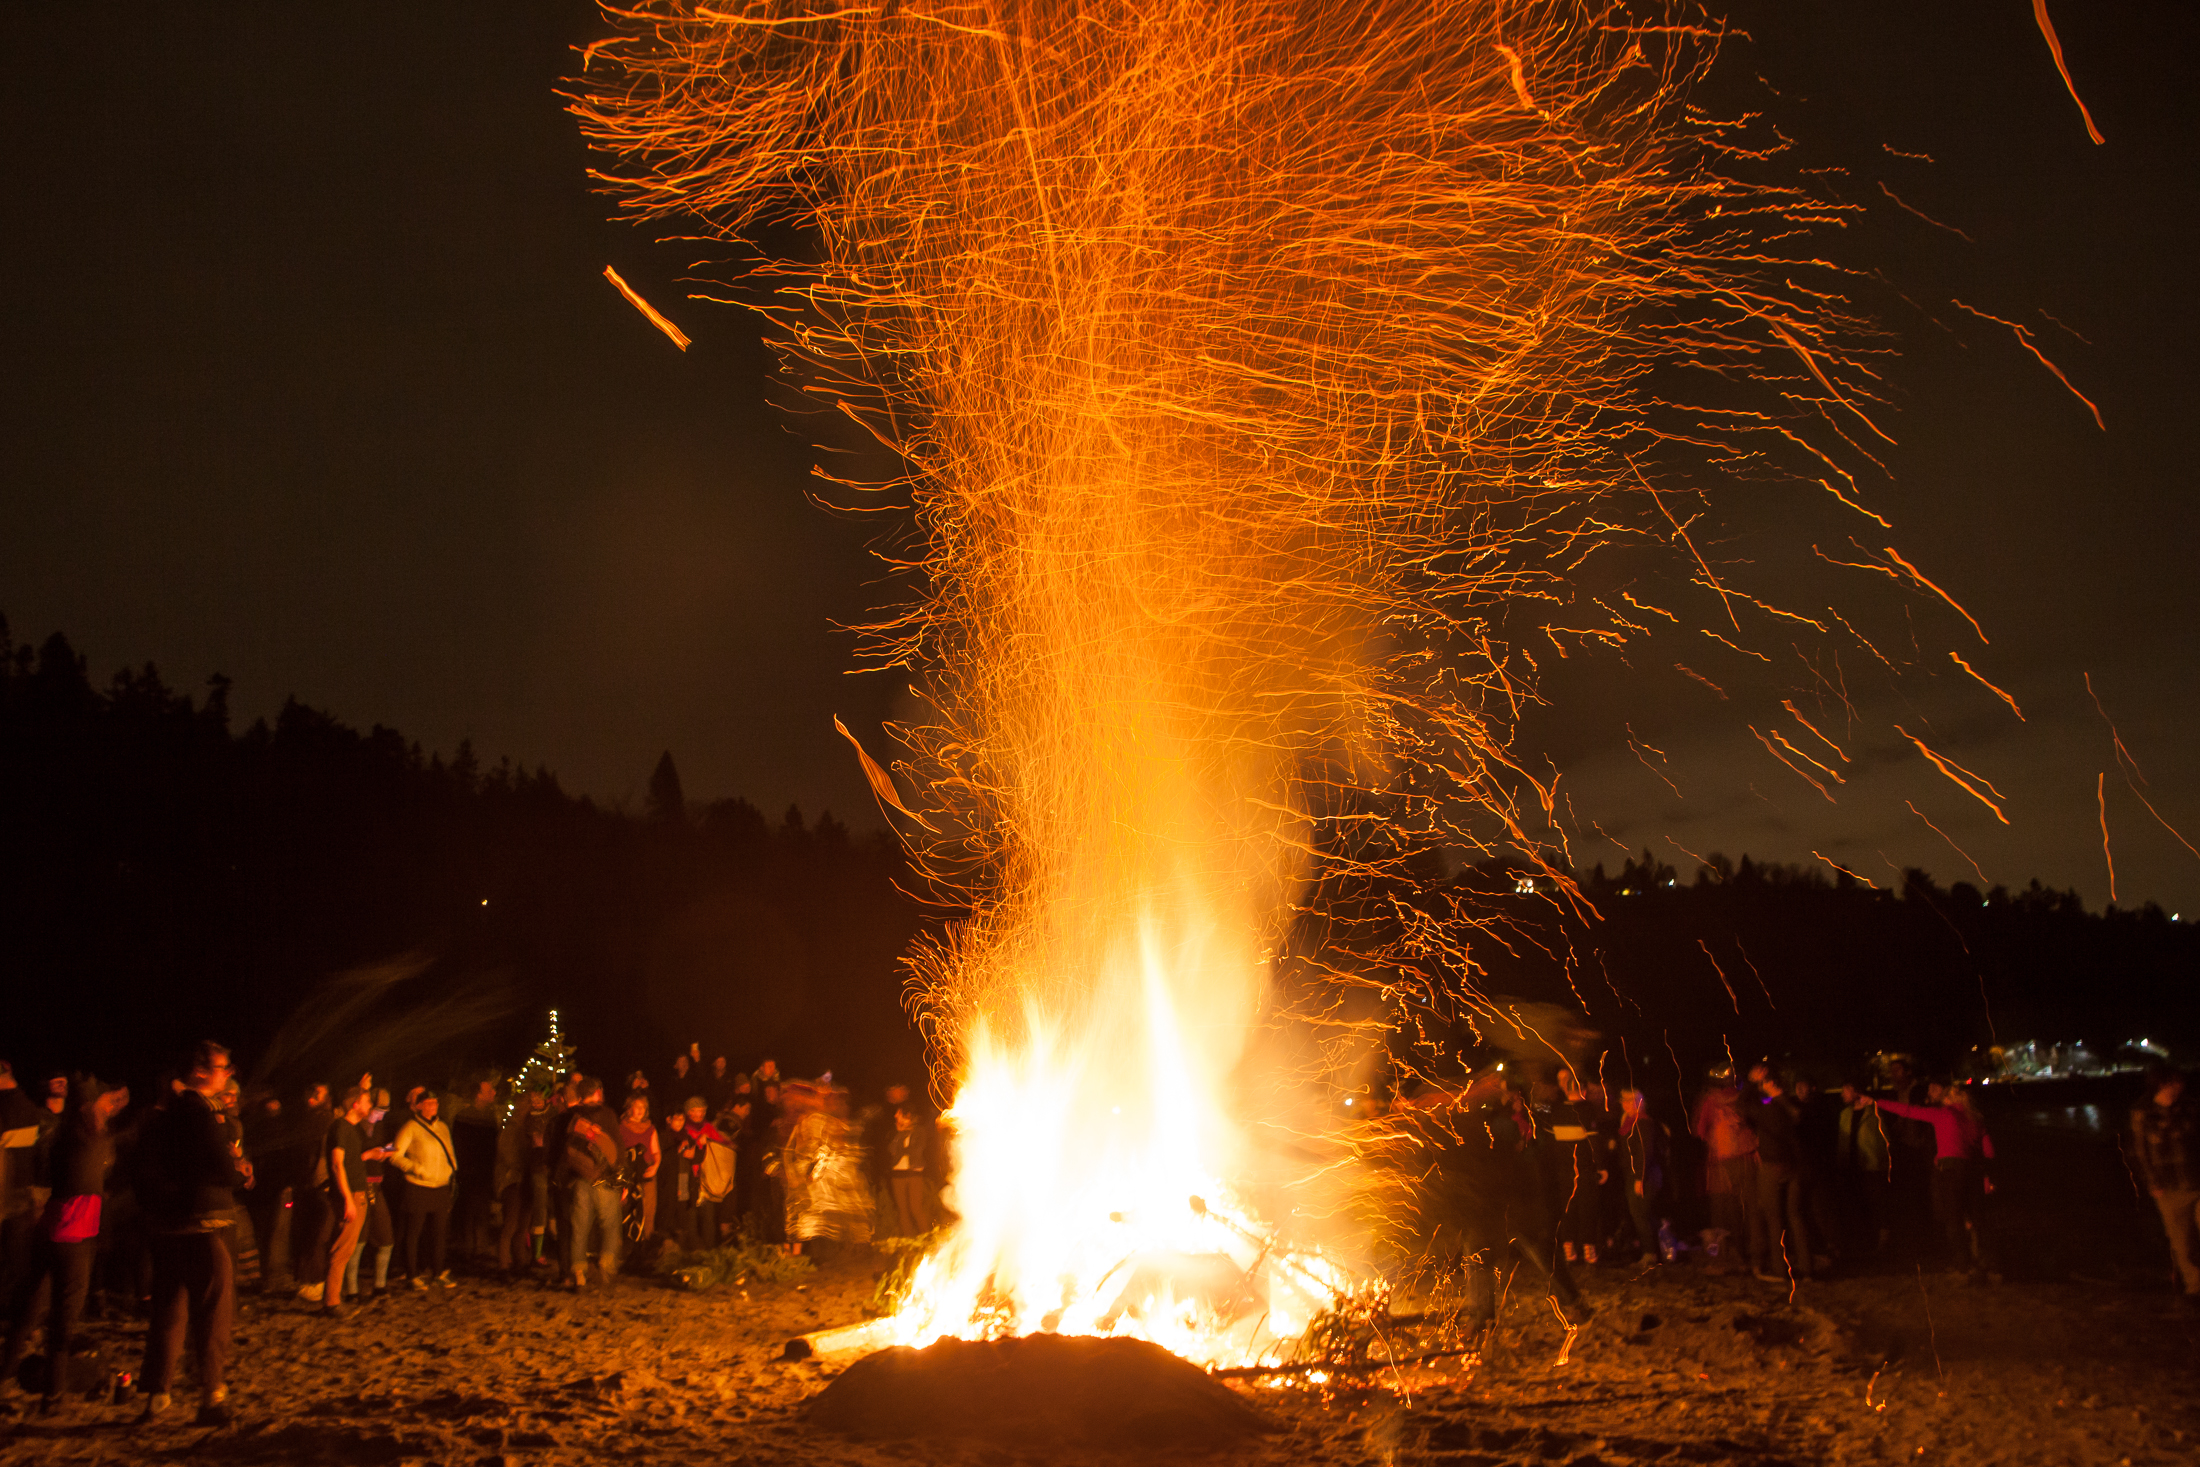 Participants take part in a giant New Year's Christmas Tree bonfire at Golden Gardens Park in early January.